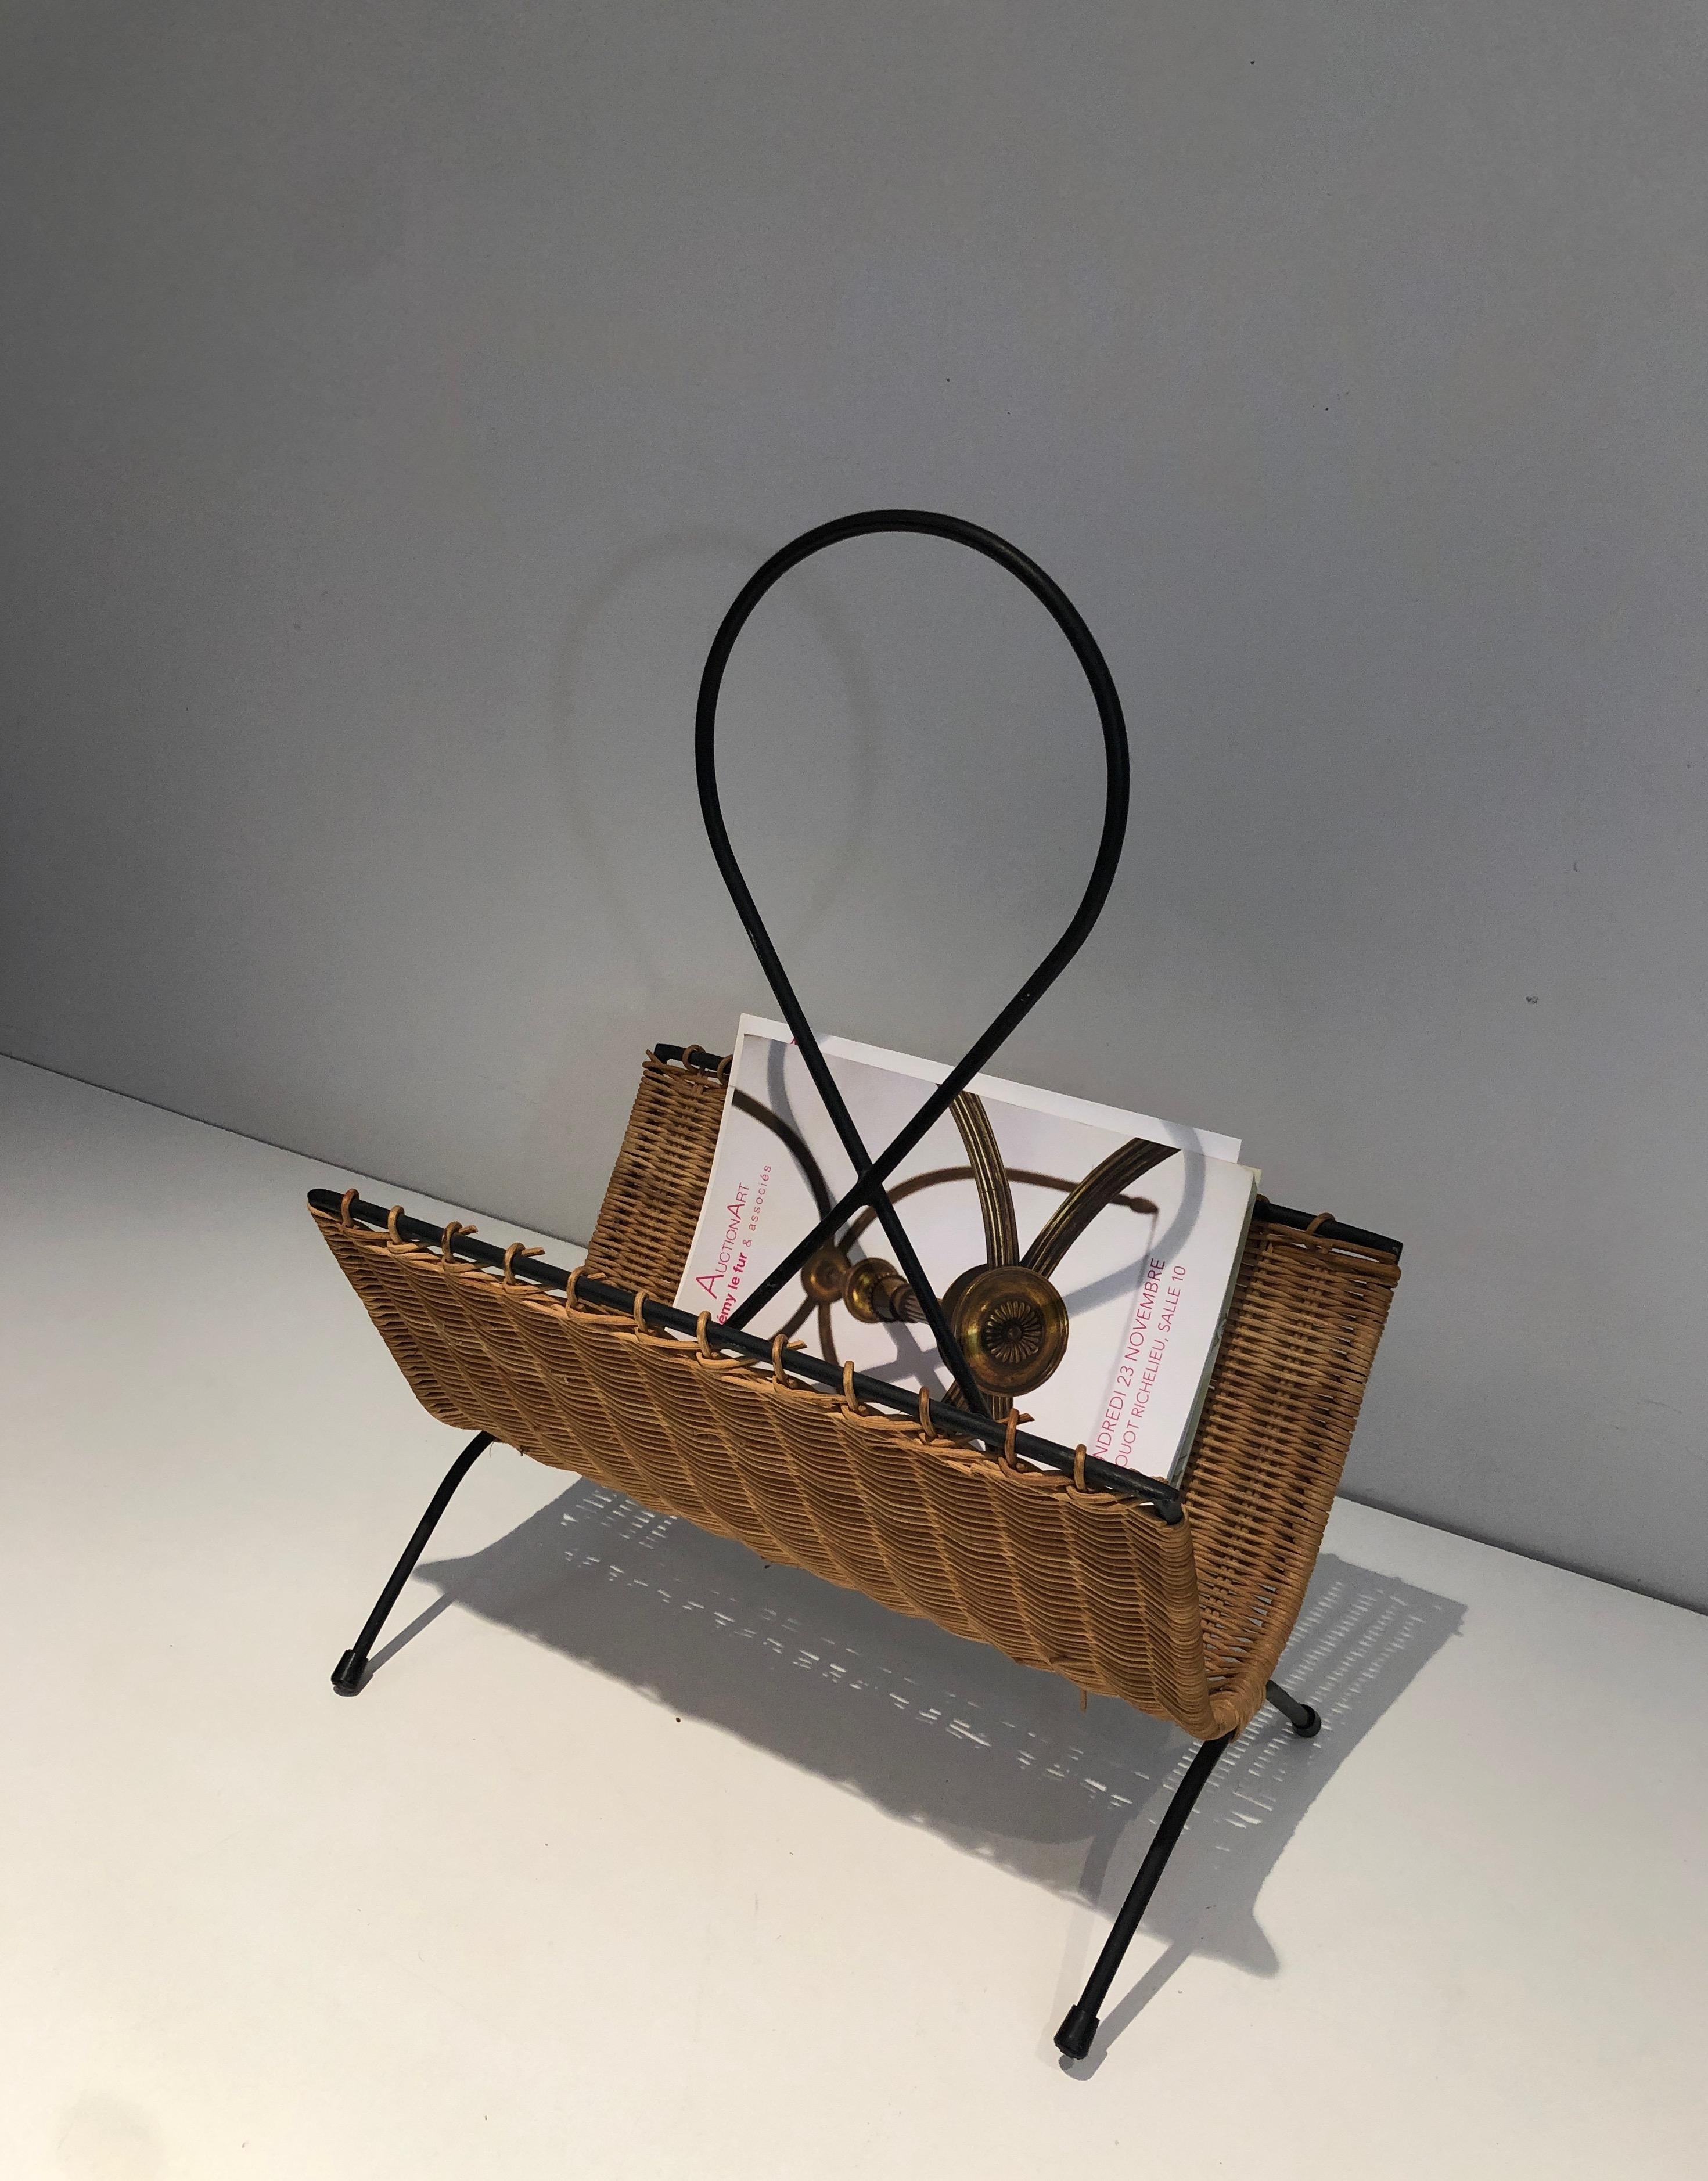 Black Lacquered Metal Magazine Rack, French Work, Circa 1950 For Sale 1